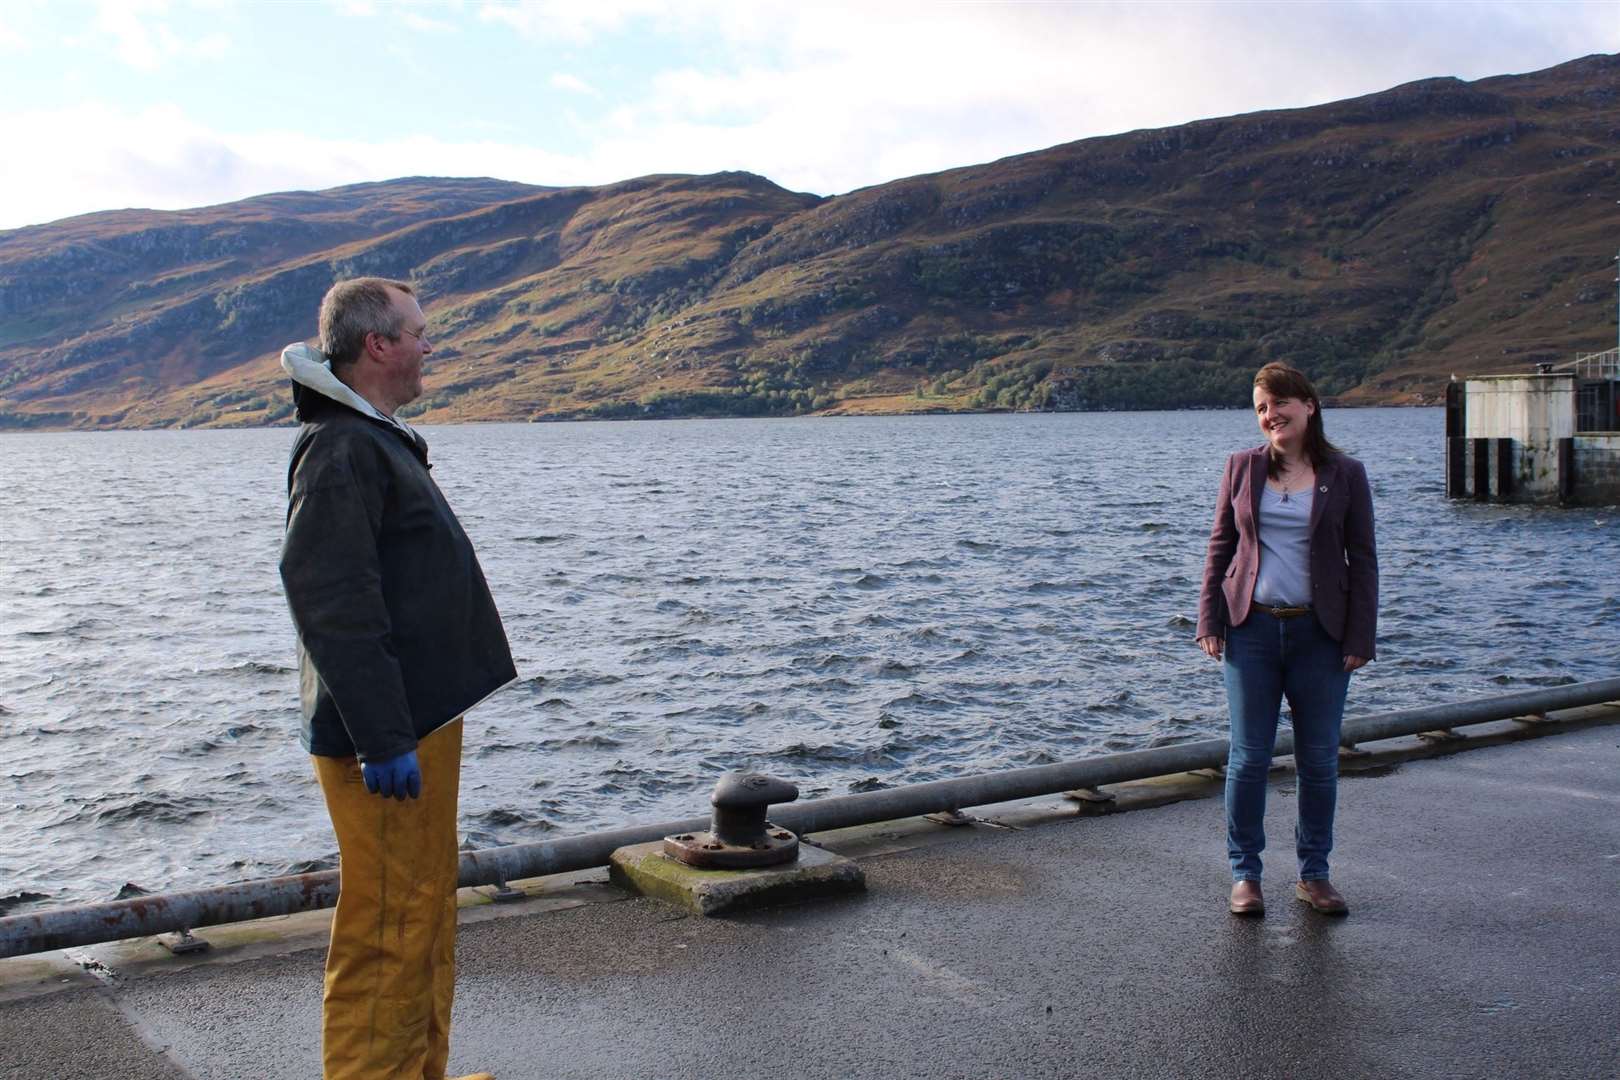 Maree Todd speaking to a fisherman at Ullapool prior to the latest lockdown restrictions.